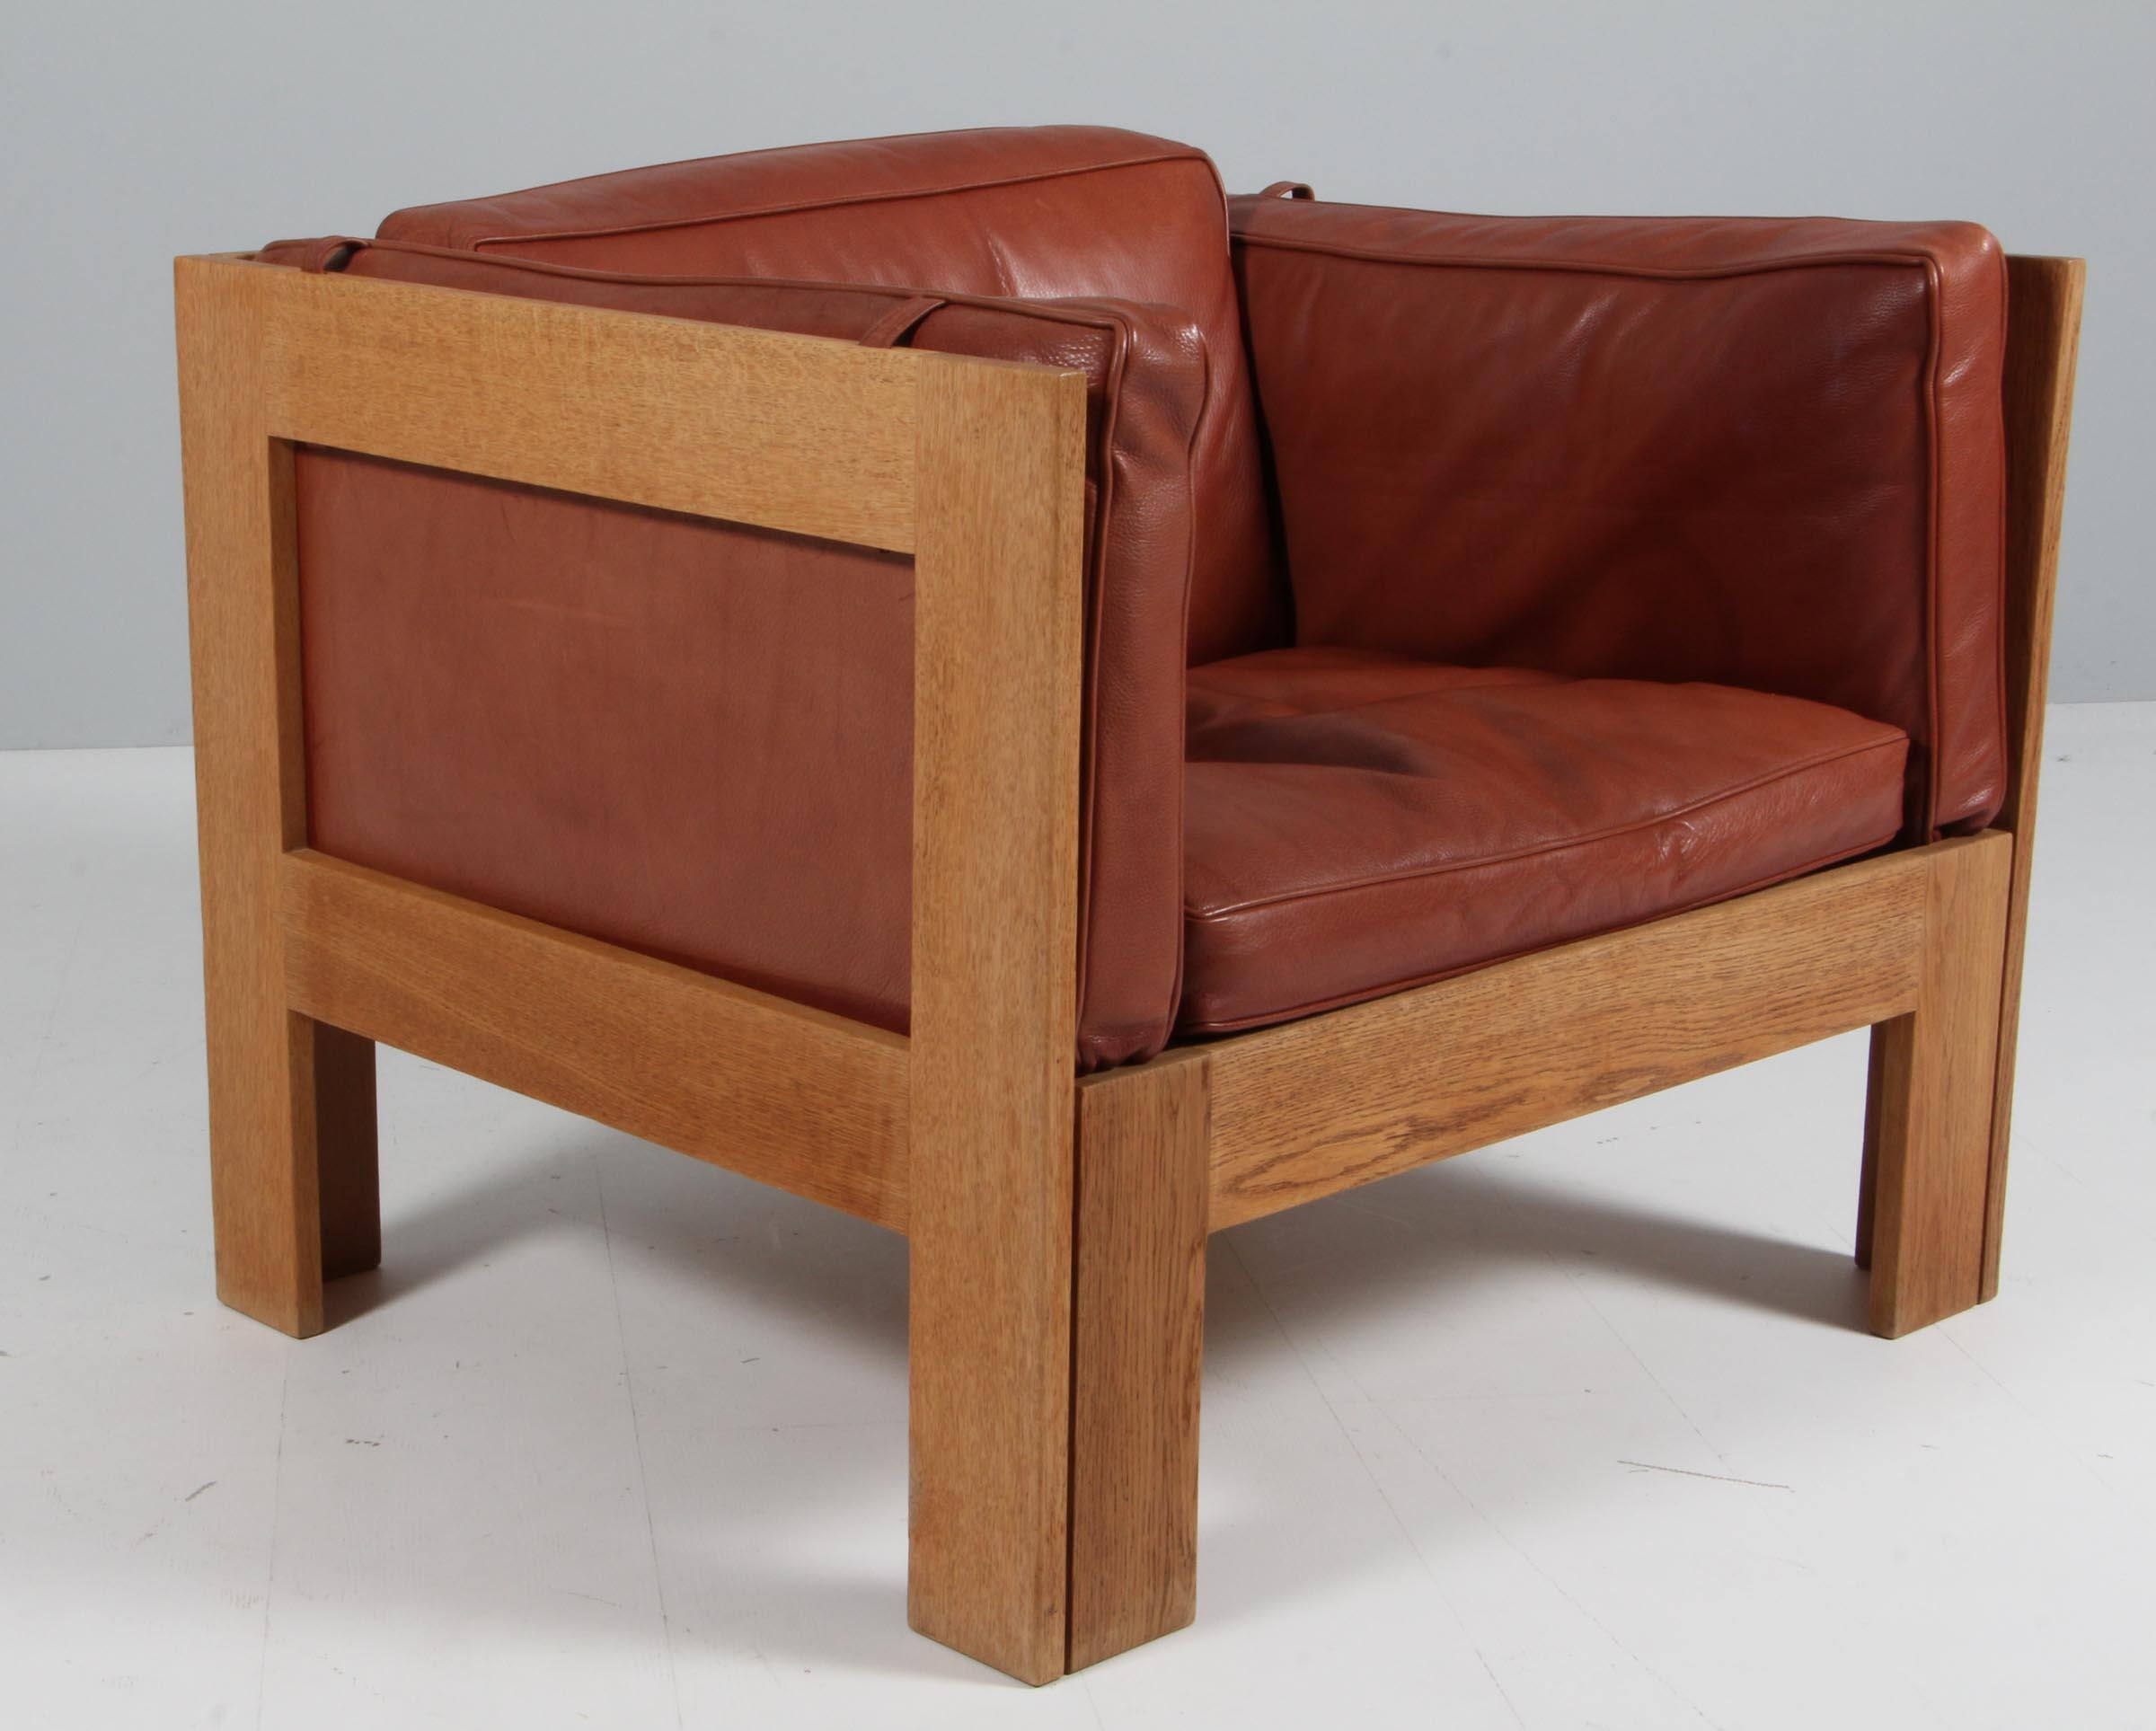 Scandinavian Modern Tage Poulsen lounge chair, in Oak and Patinated Leather, Denmark, 1970s